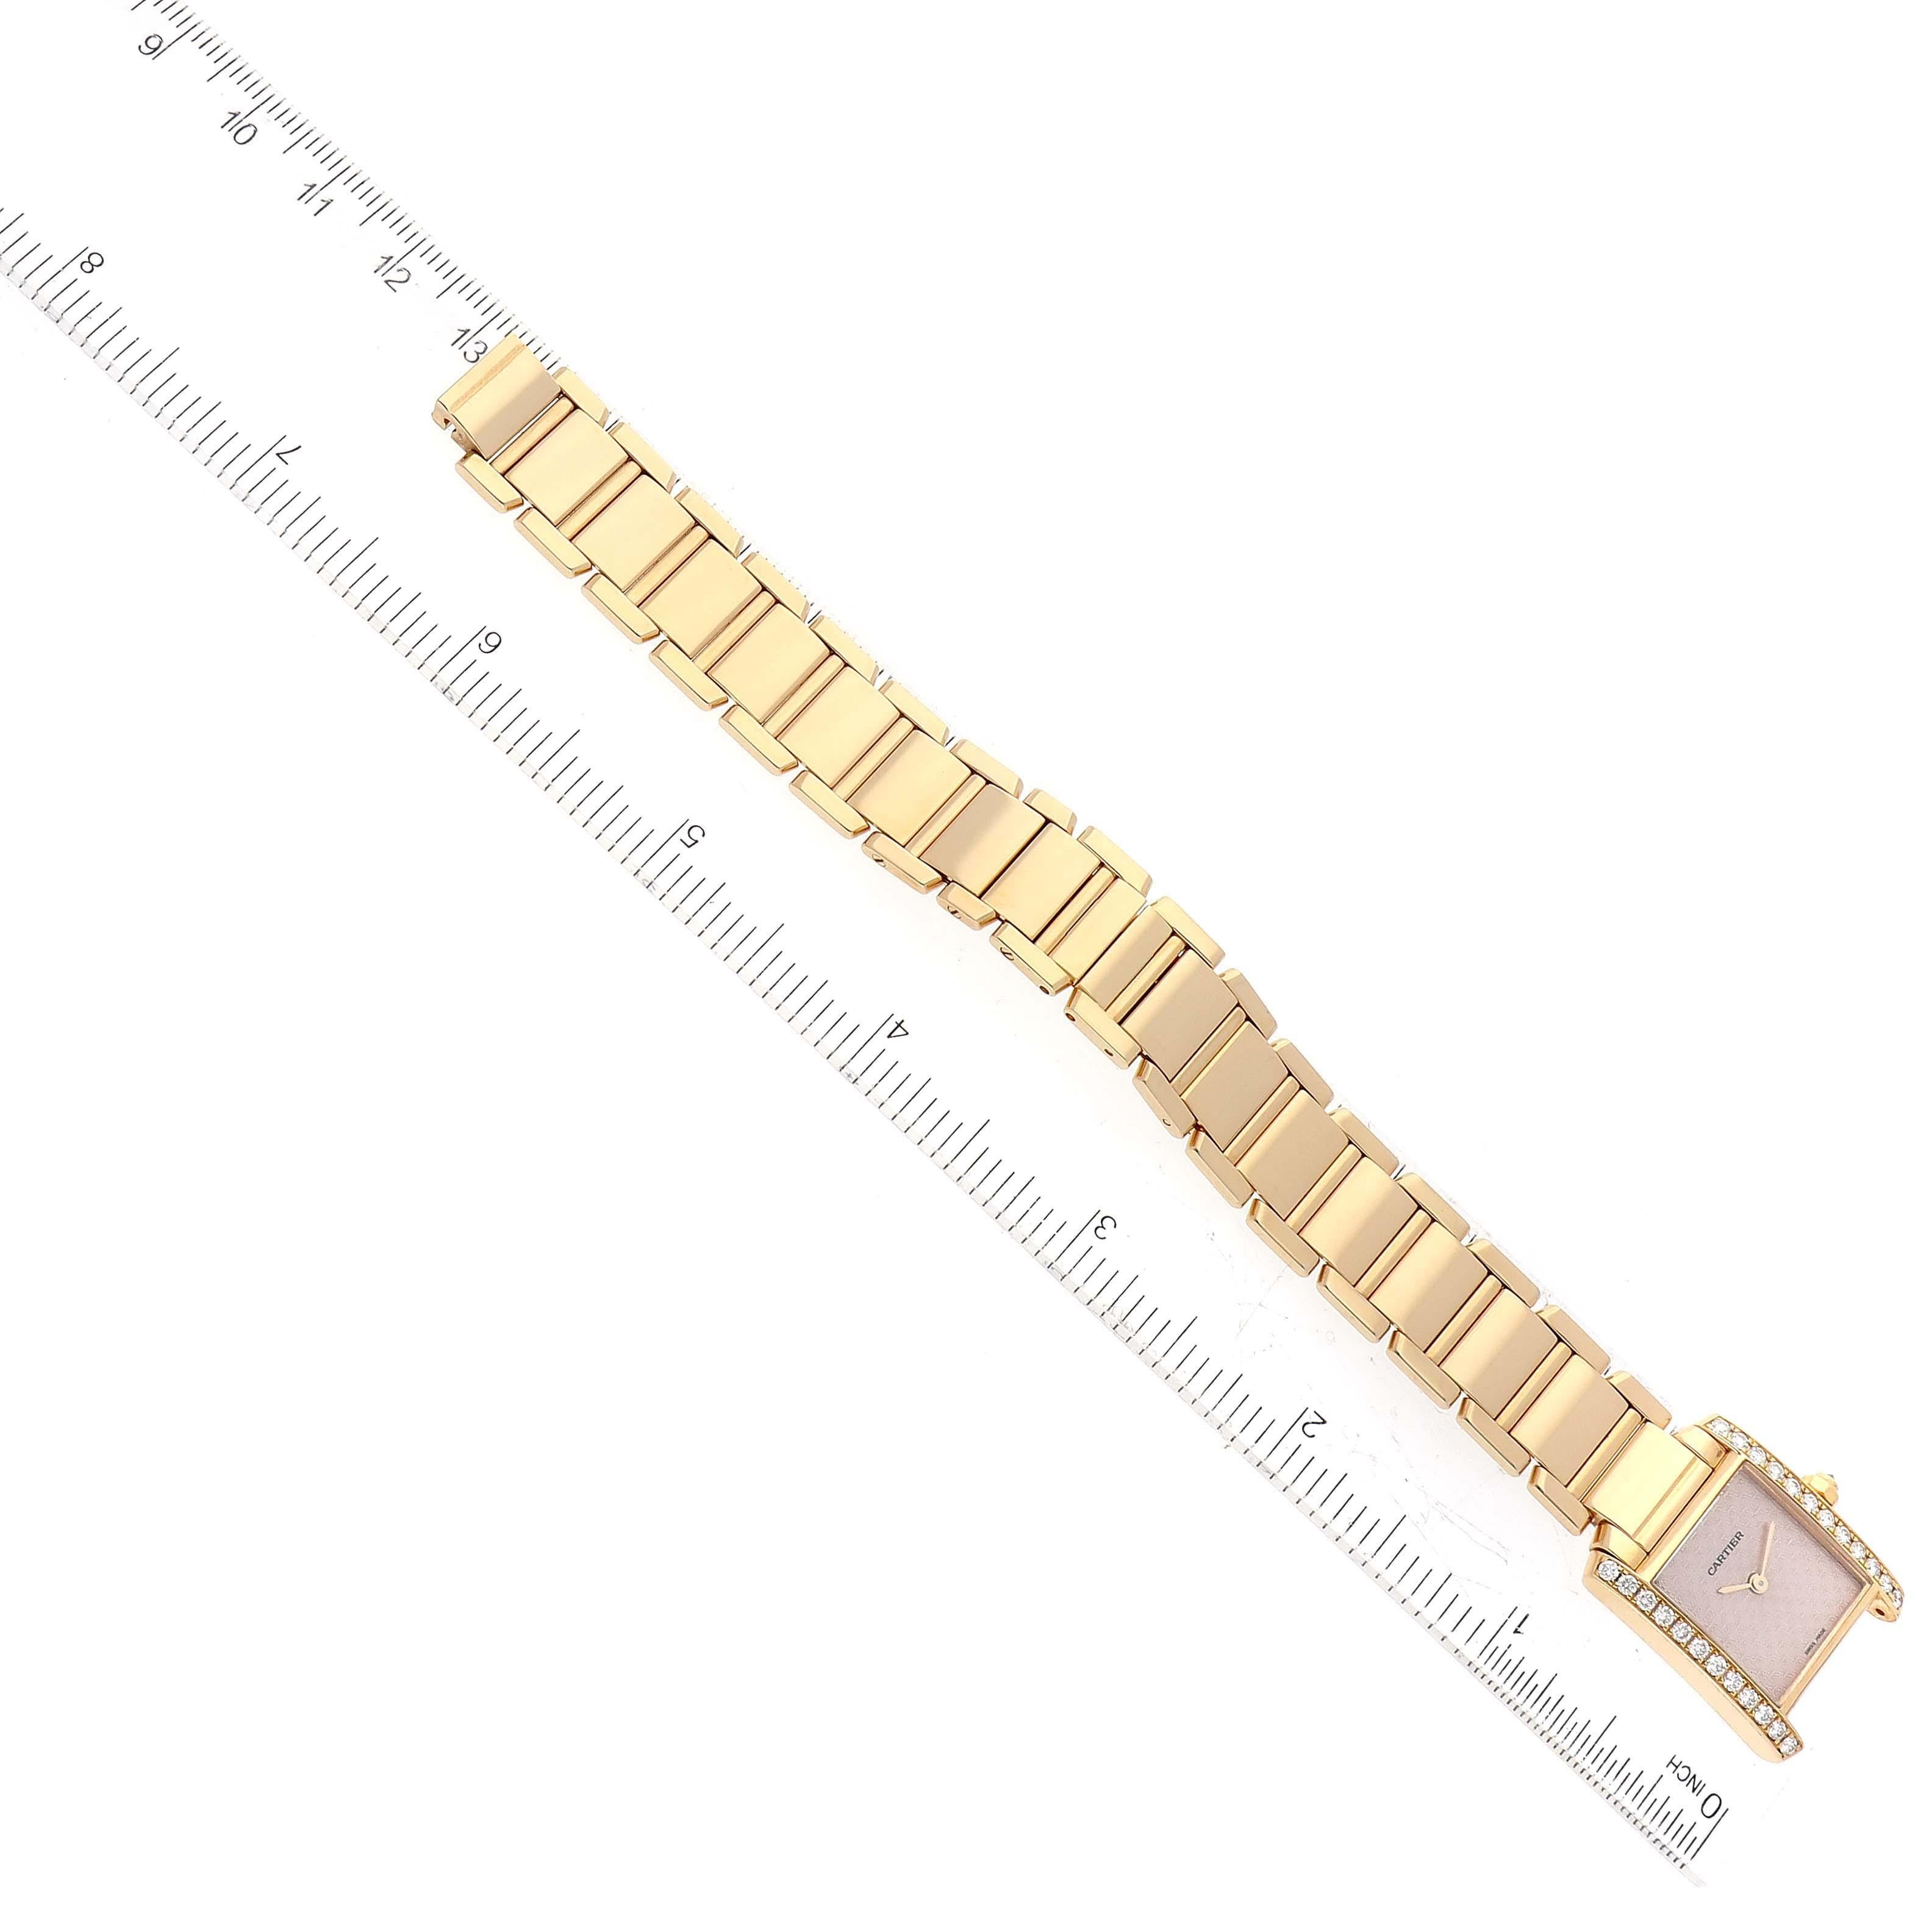 Cartier Tank Francaise Yellow Gold Rose Dial Diamond Ladies Watch WE1021R8 4